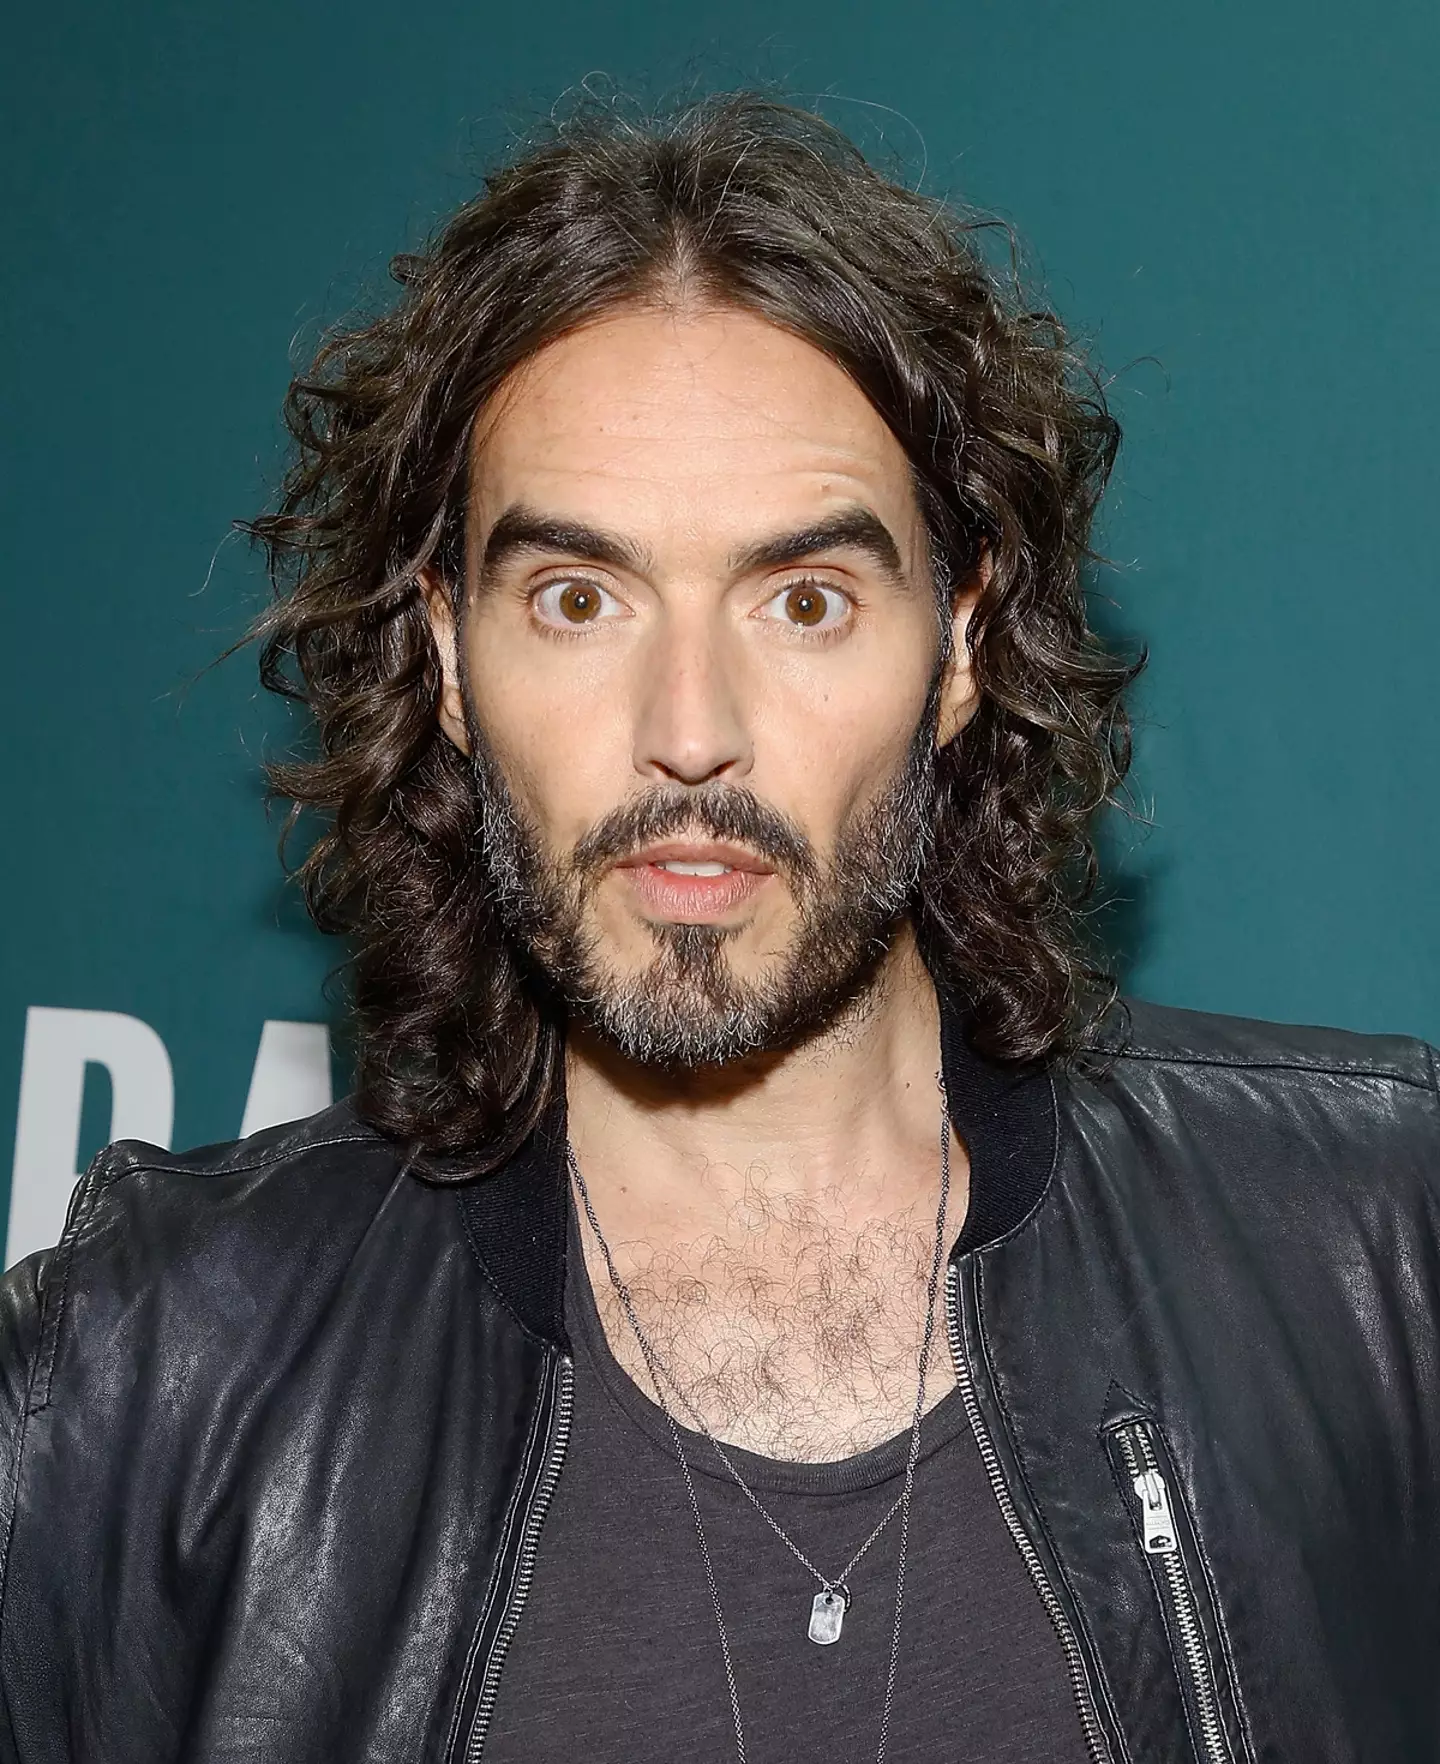 Russell Brand has vehemently denied the allegations against him.